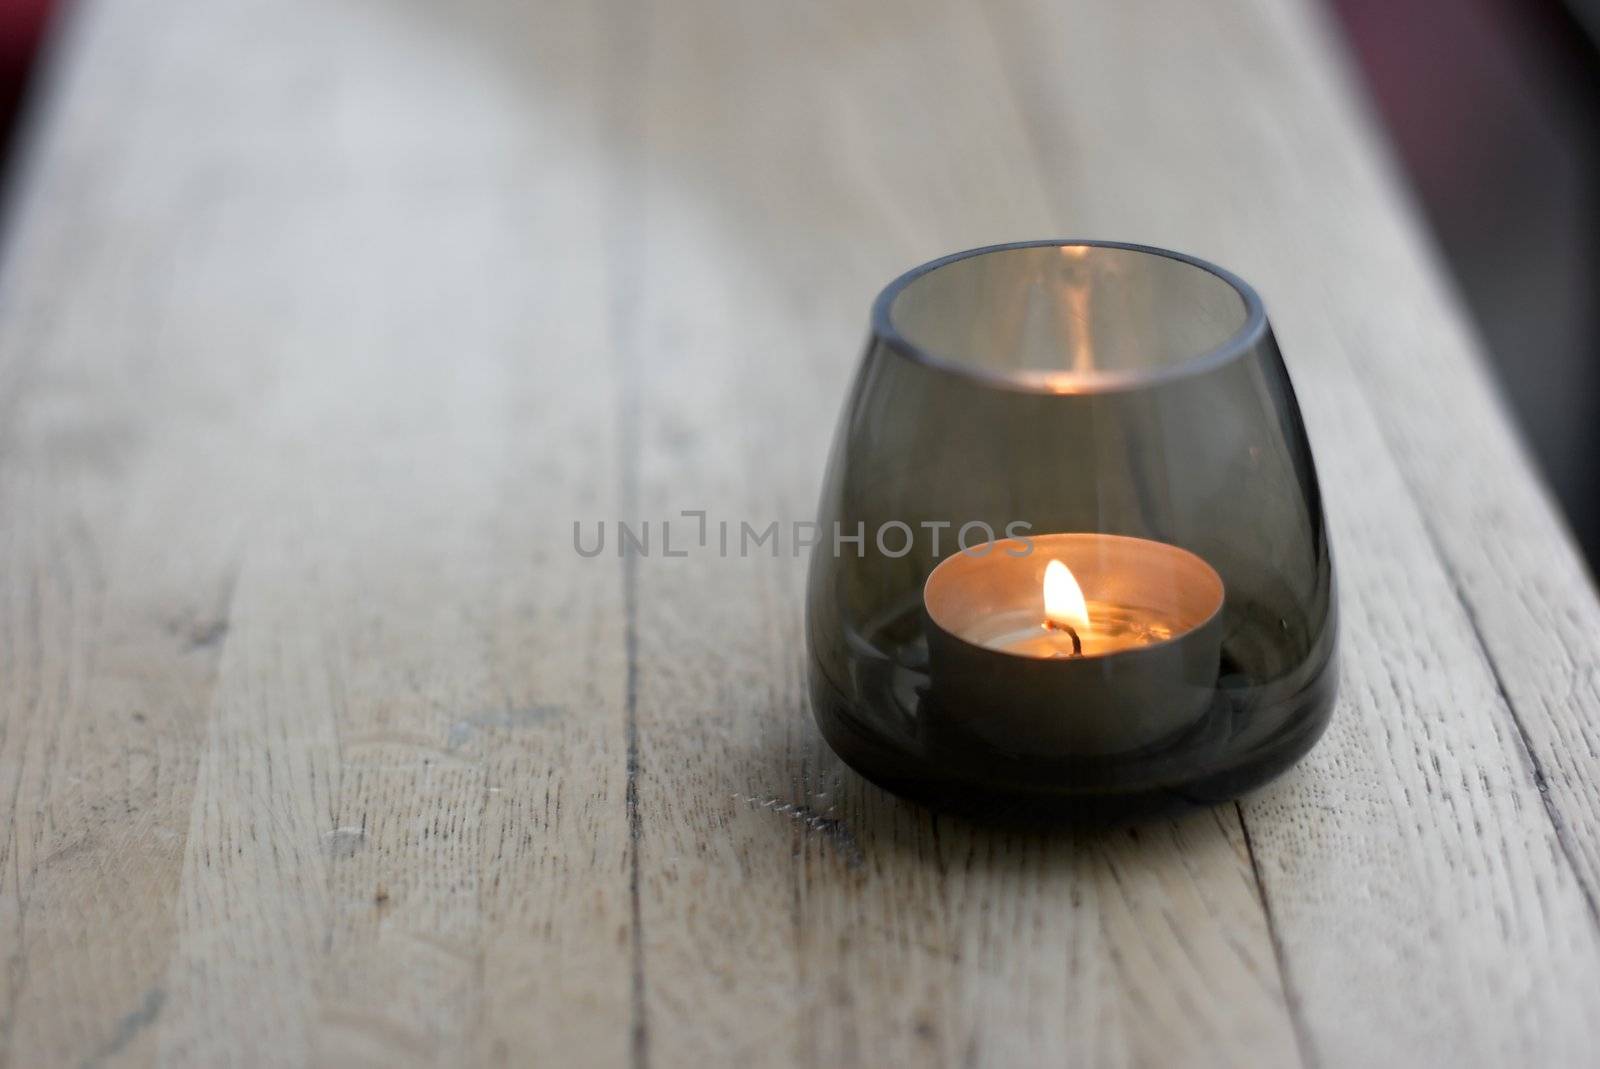 Small burning candle in a glass holder